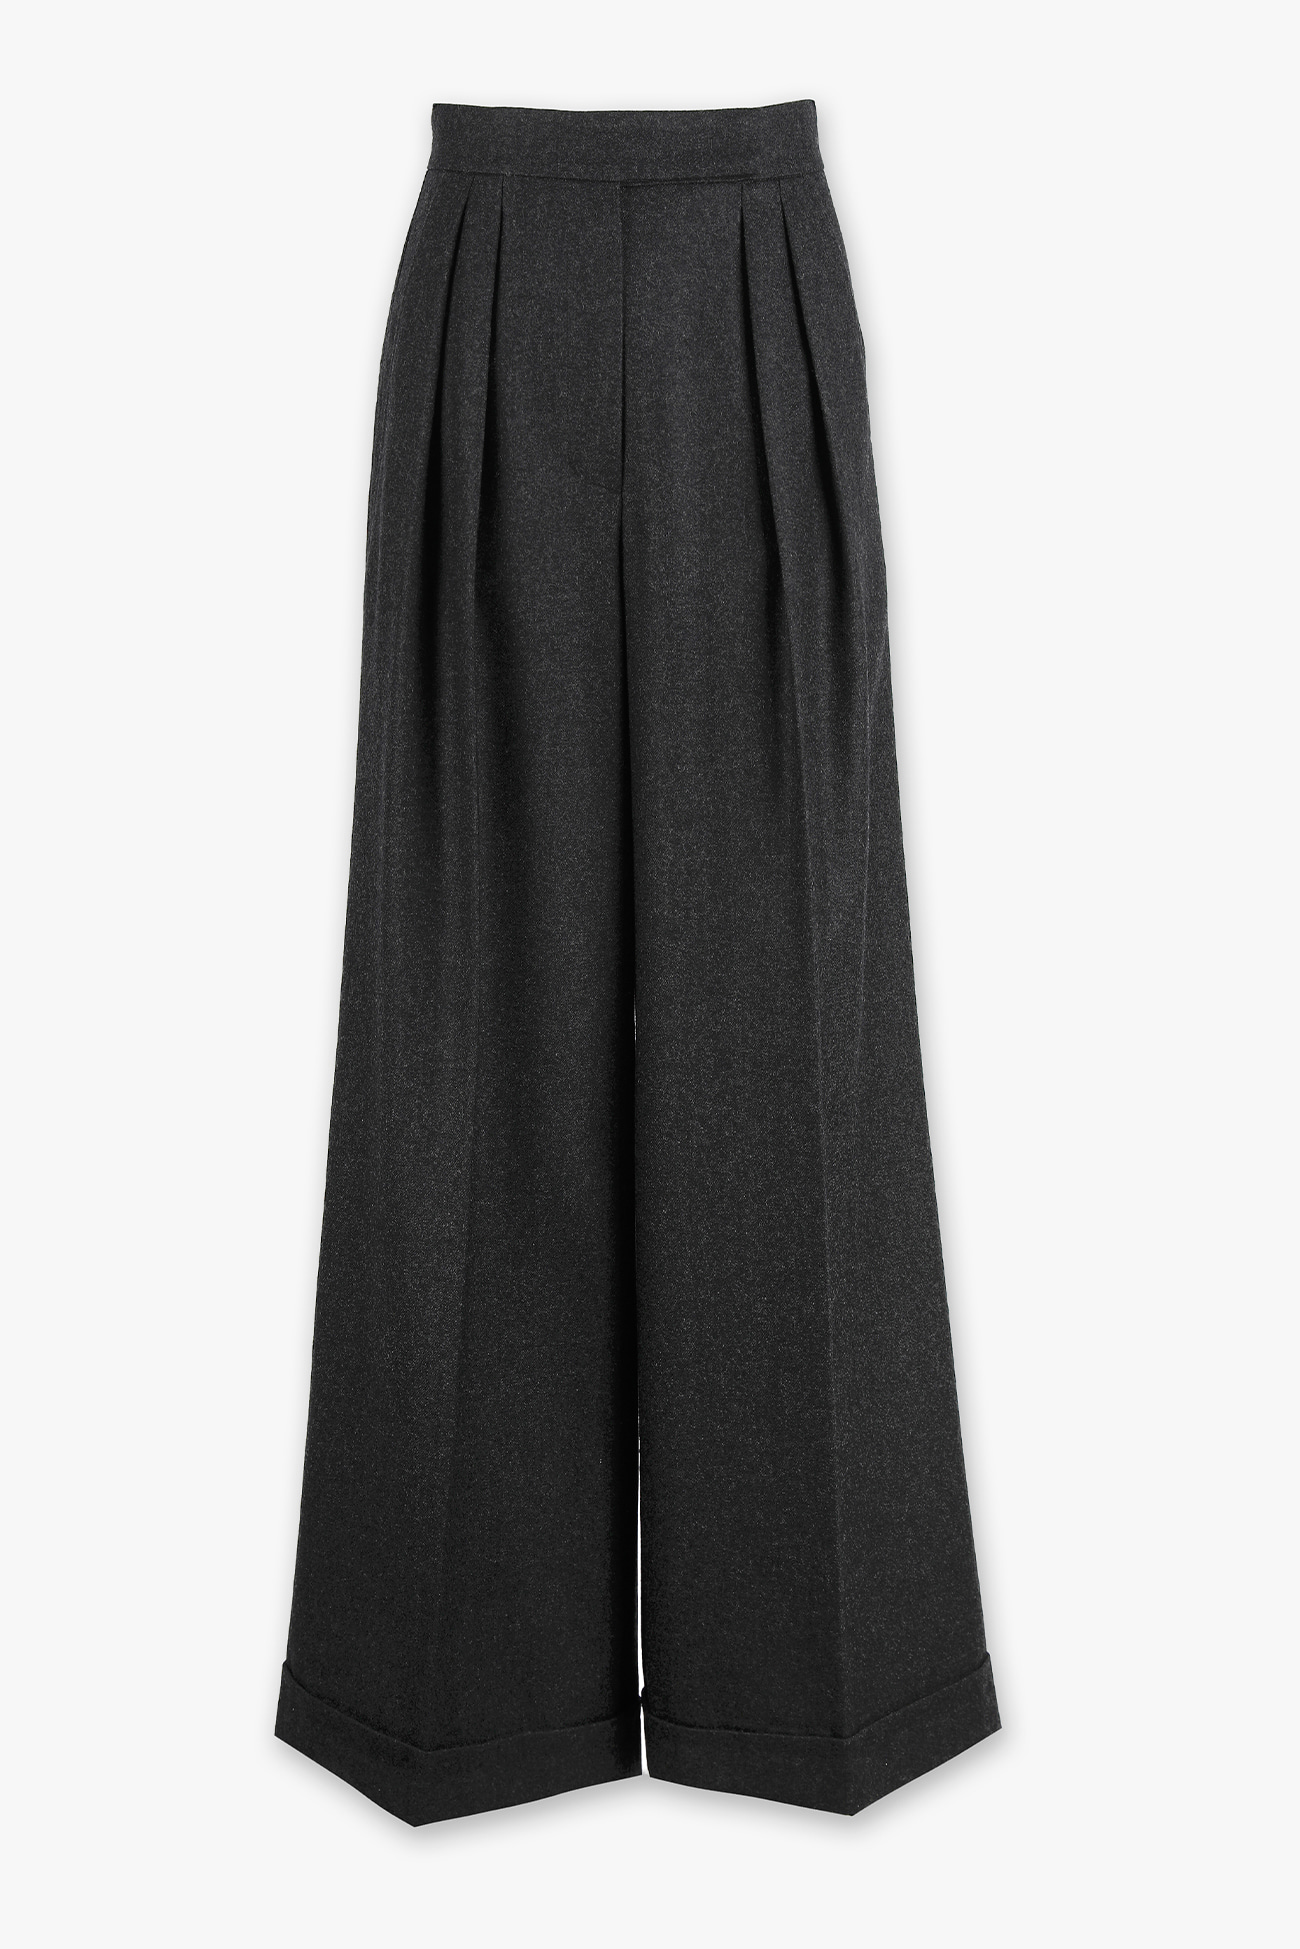 HIGH QUALITY LINE - HIGH END WOOL Wide-leg TROUSERS (CHARCOAL)